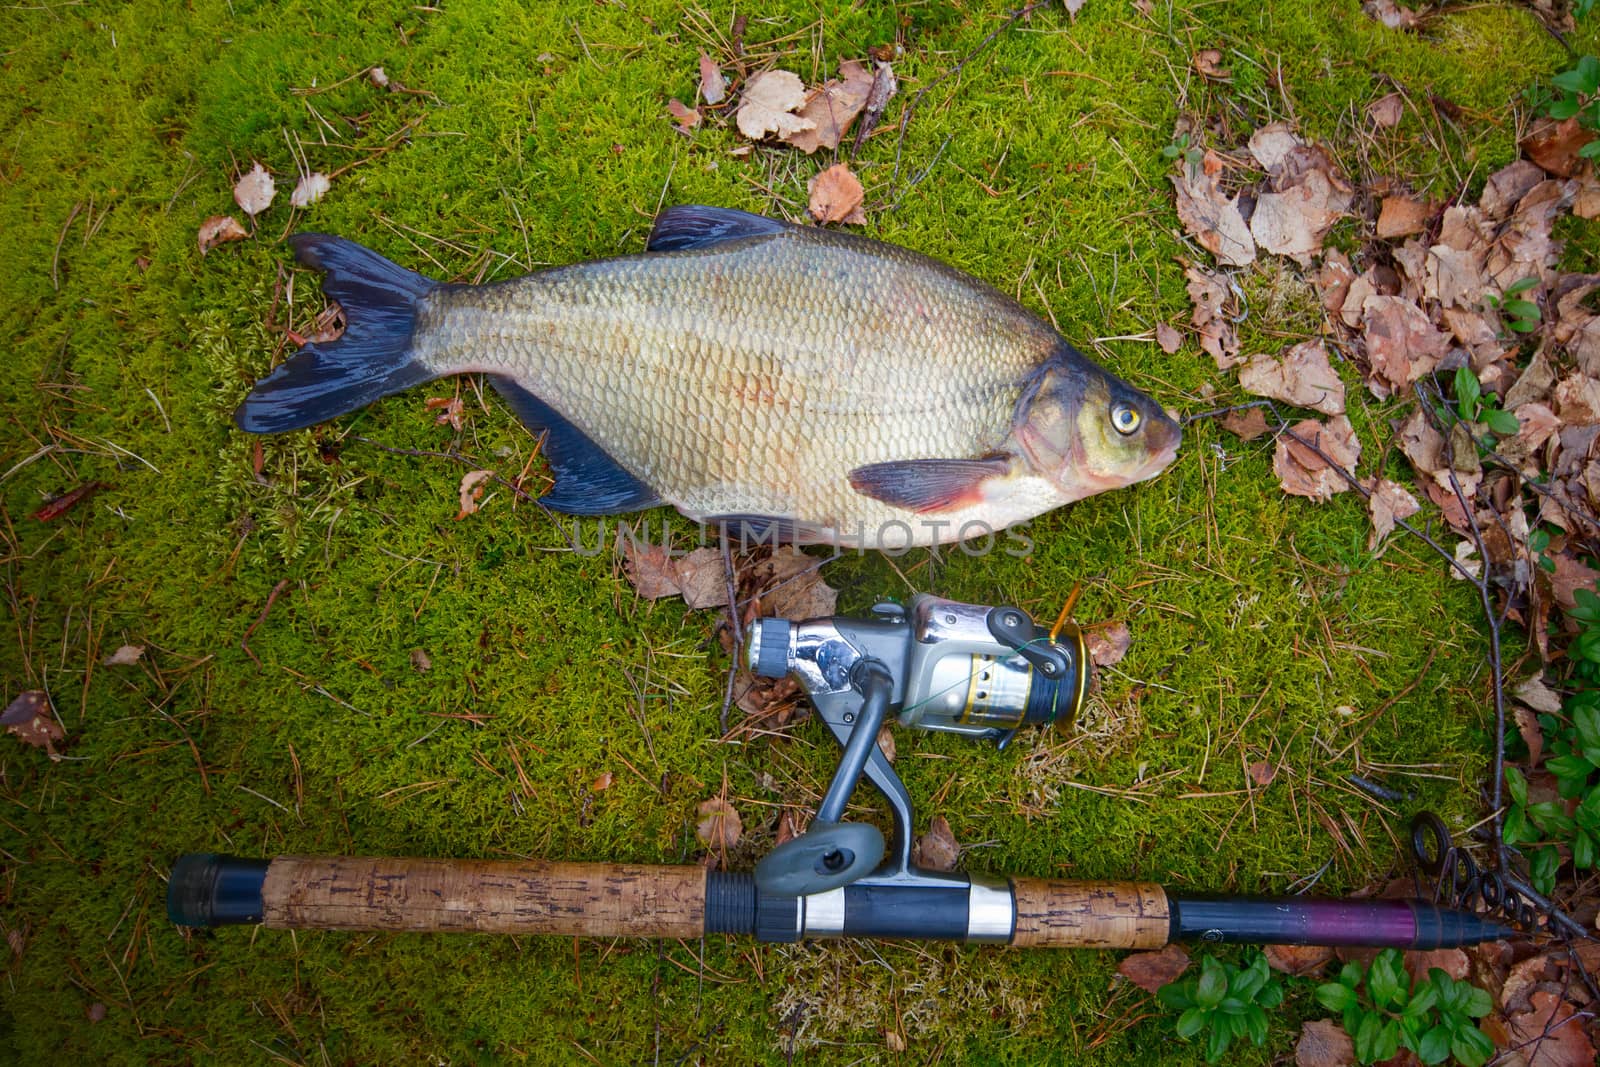 the bream among snags and stones on the bank of the forest lake